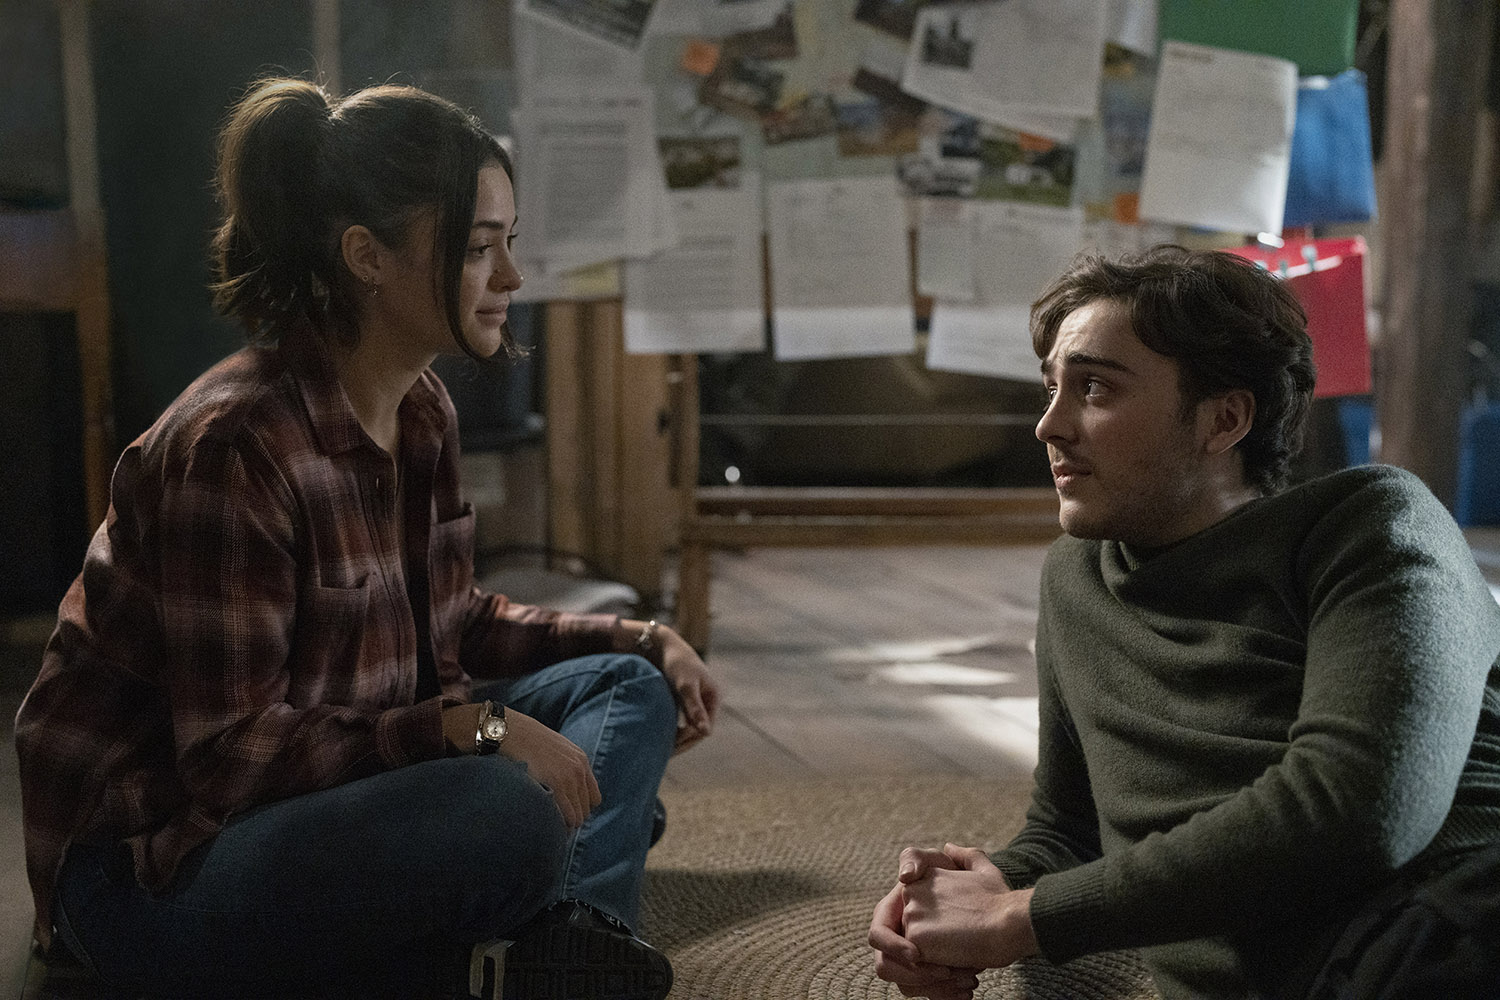 Luna Blaise as Olive Stone and Ty Doran as Cal Stone sitting on the floor and talking to each other in Manifest Season 4 Part 1.